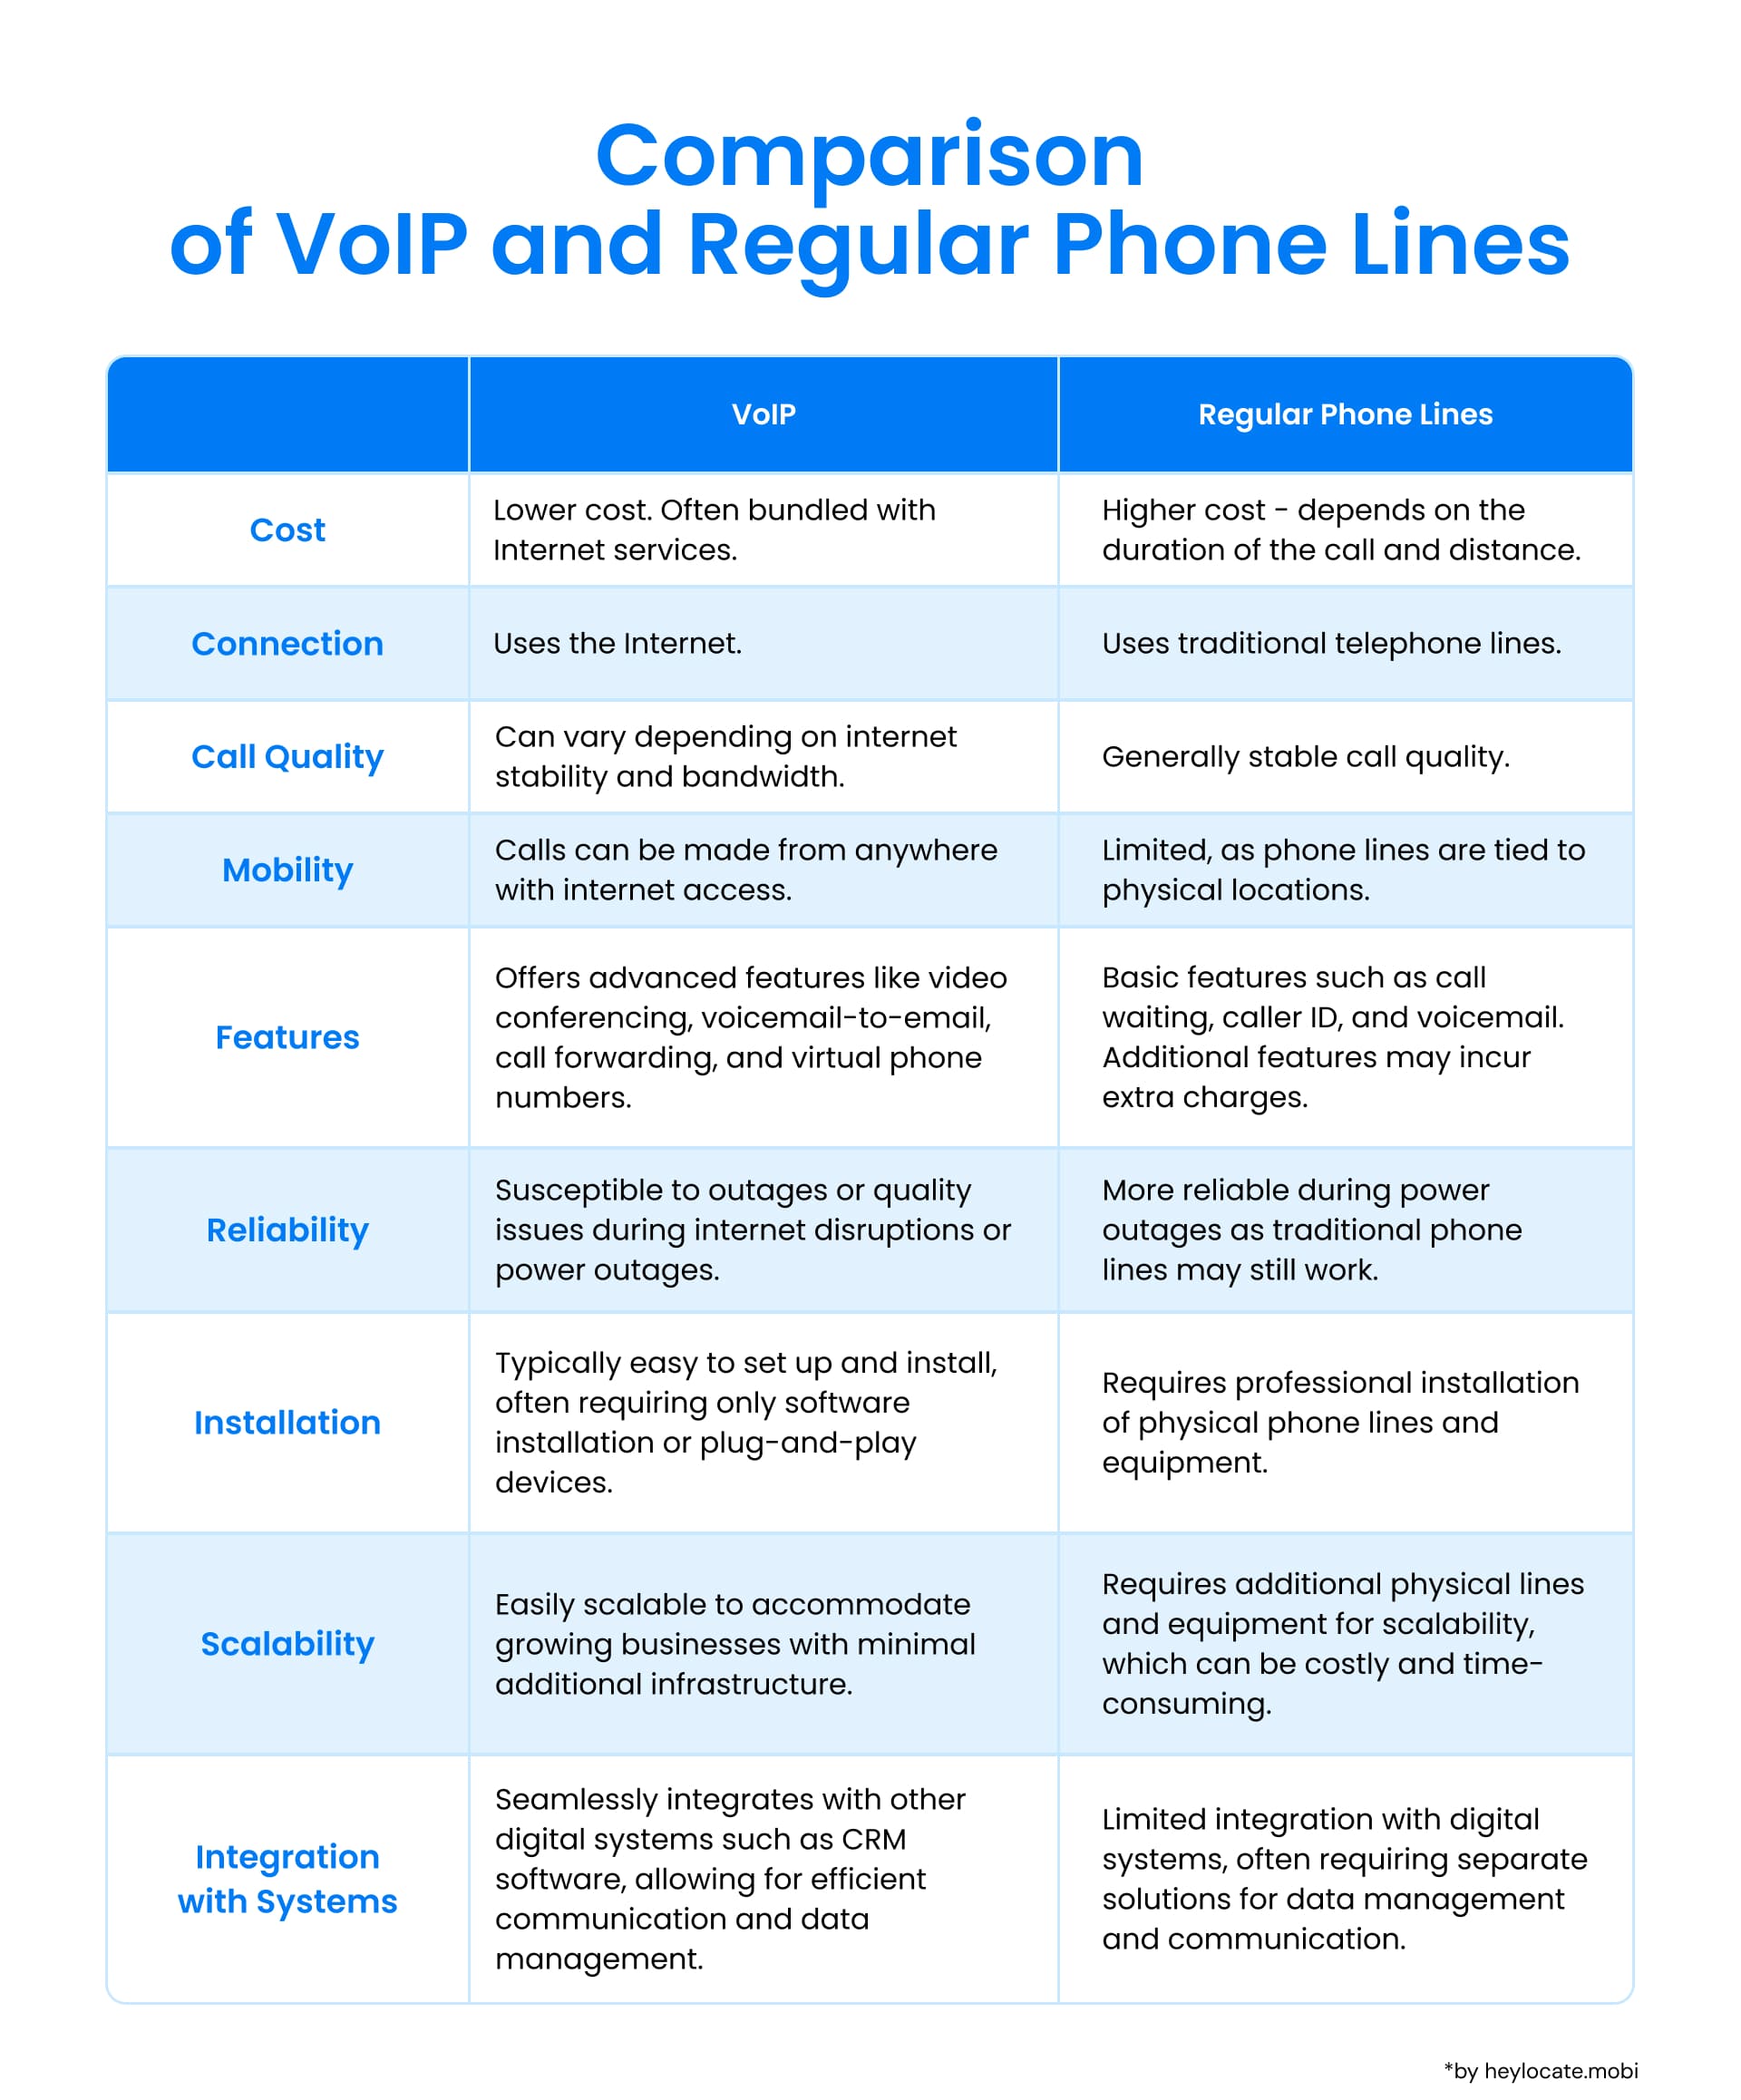 A table comparing VoIP vs Traditional Phone Services, taking into account the following parameters: Cost, Connection, Call Quality, Mobility, Features, Reliability, Installation, Scalability, Integration with Systems